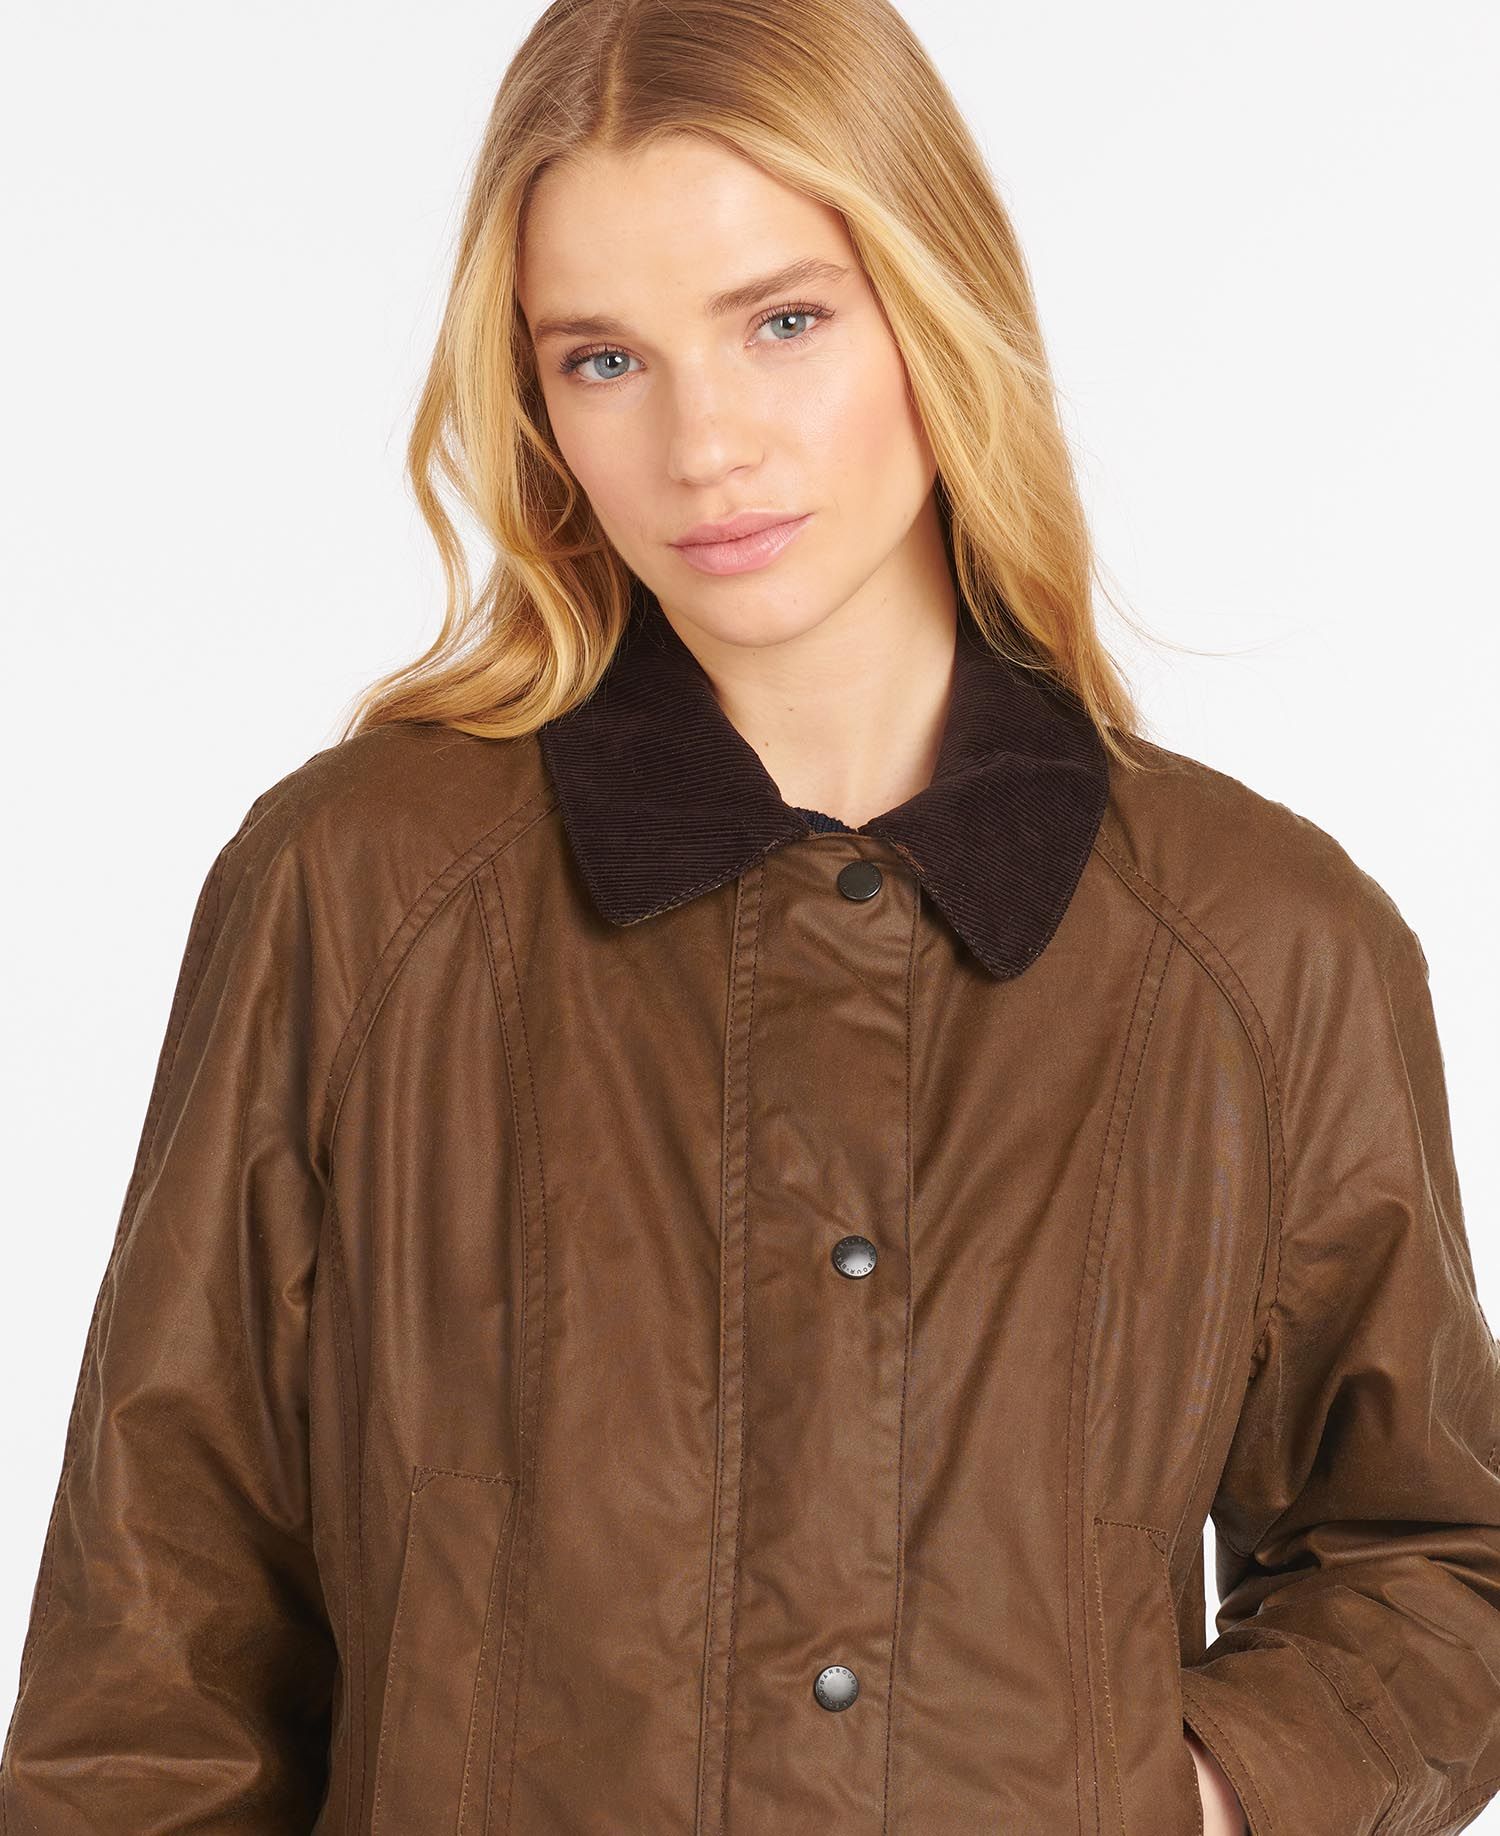 Barbour Beadnell Wax Jacket in Brown | Barbour